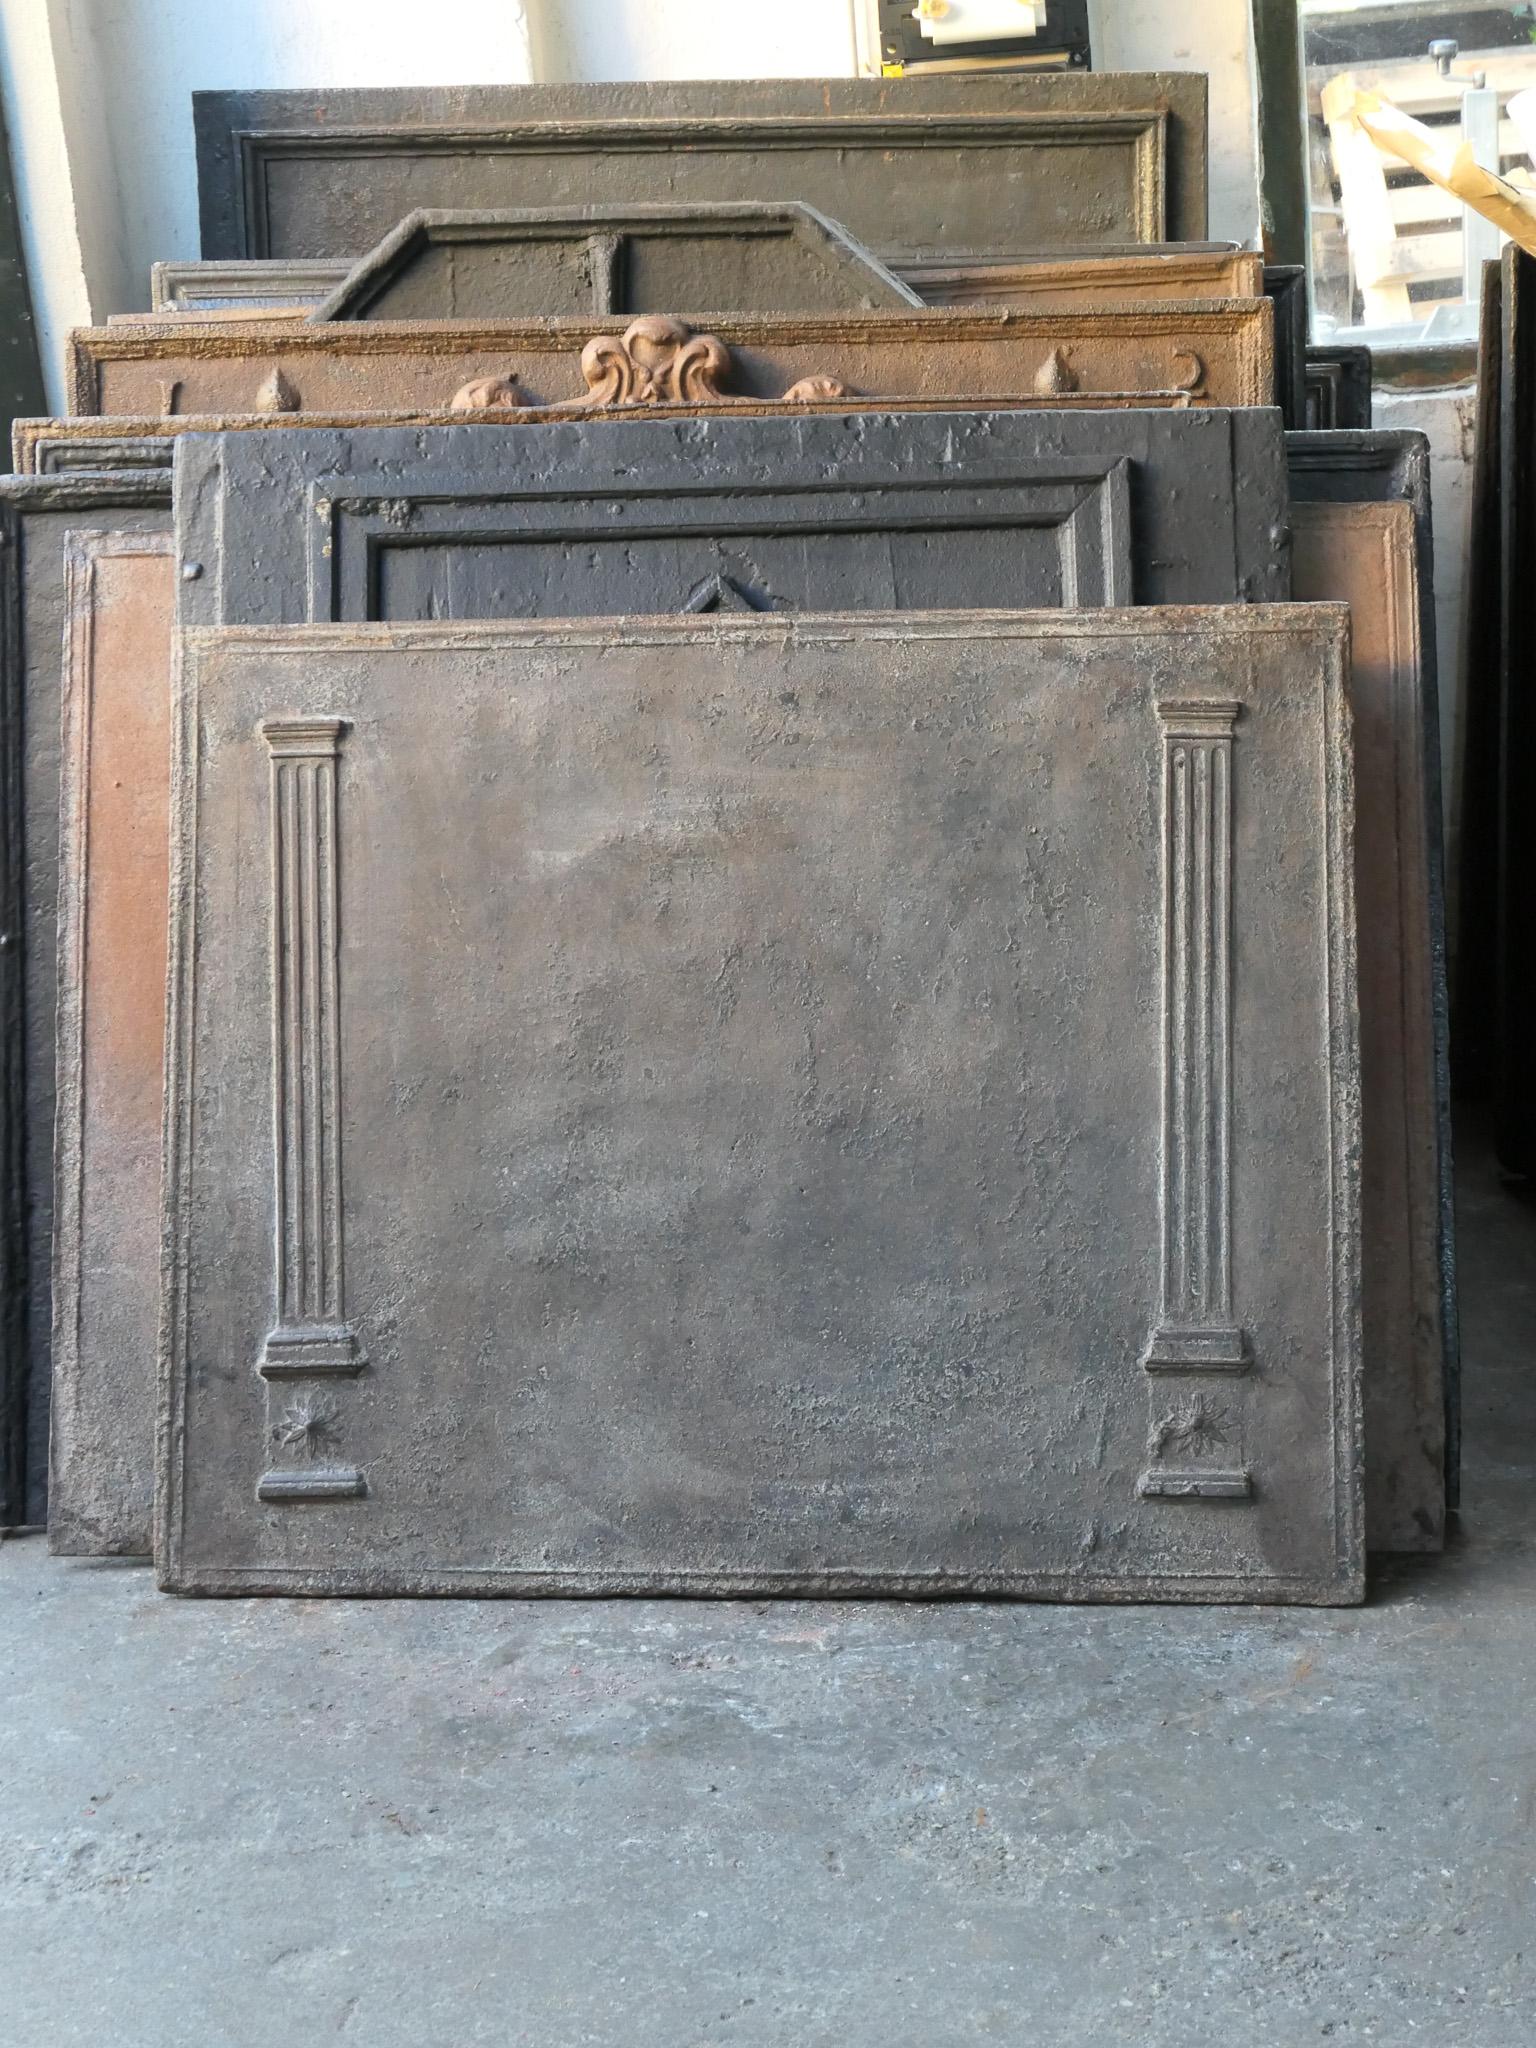 Late 18th - early 19th century French Neoclassical fireback with two pillars of freedom. The pillars symbolize the value liberty, one of the three values of the French revolution. 

The fireback is made of cast iron and has a brown patina. Upon